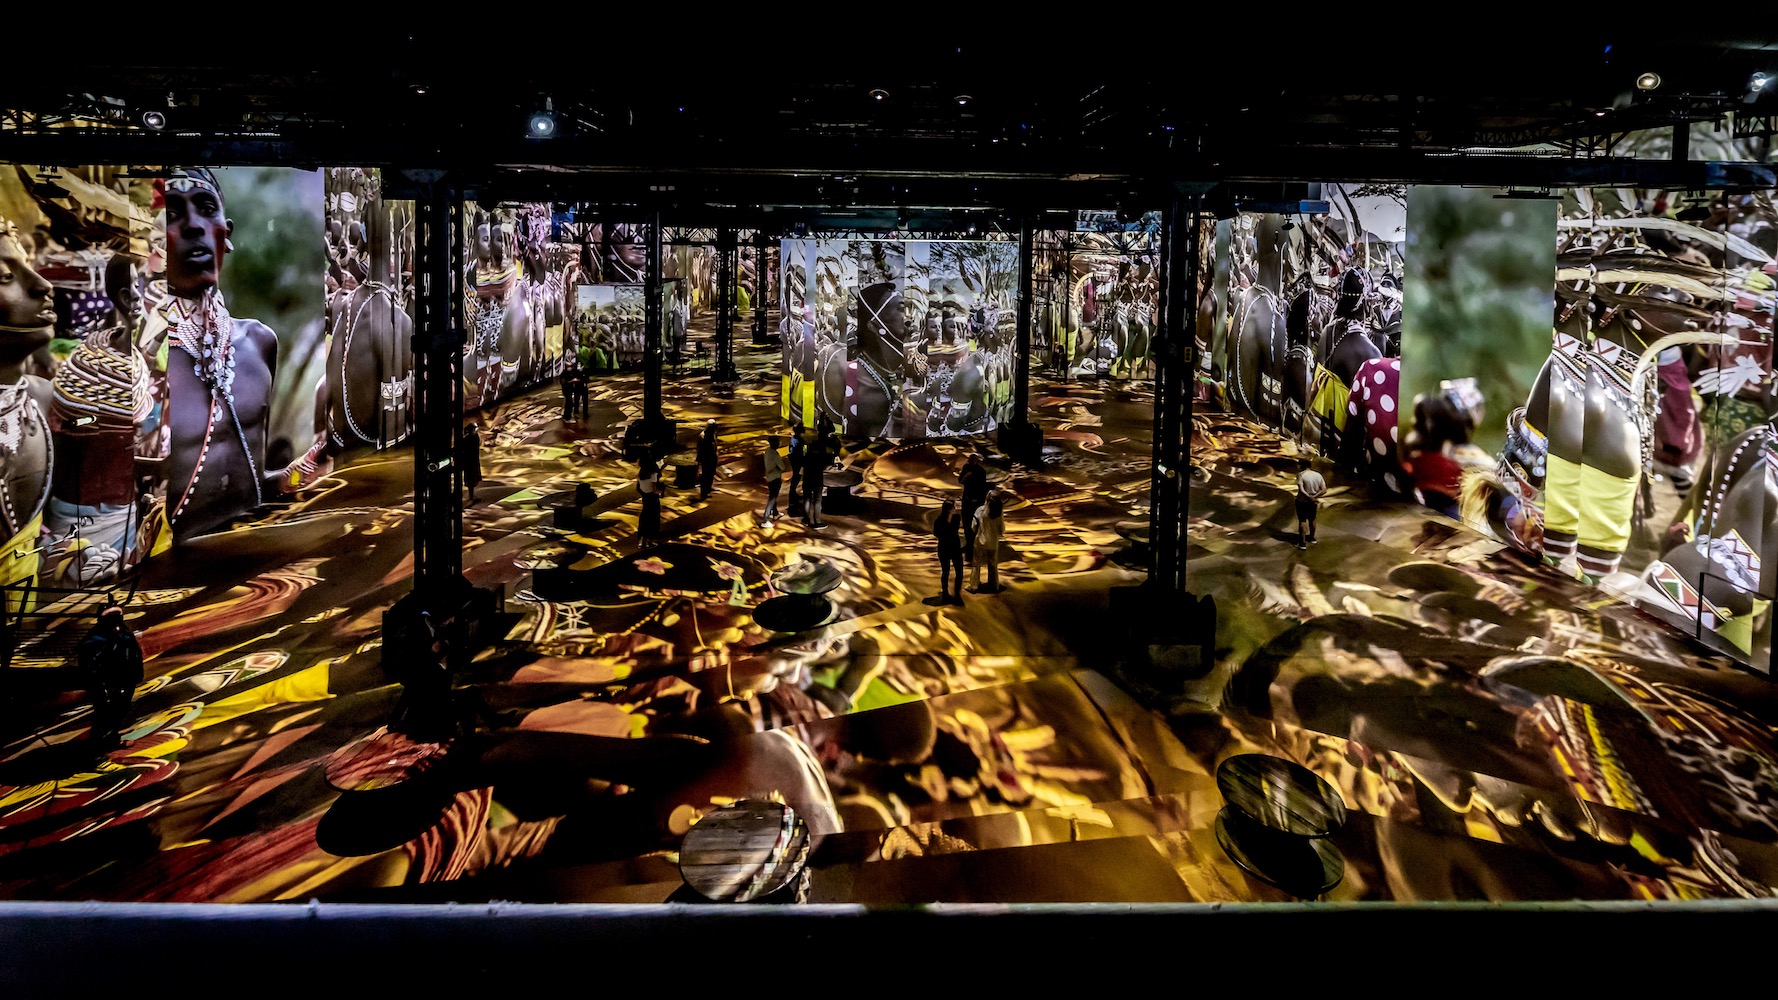 Jimmy Nelson, “The Last Sentinels,” Courtesy to the artist and Atelier des Lumières.